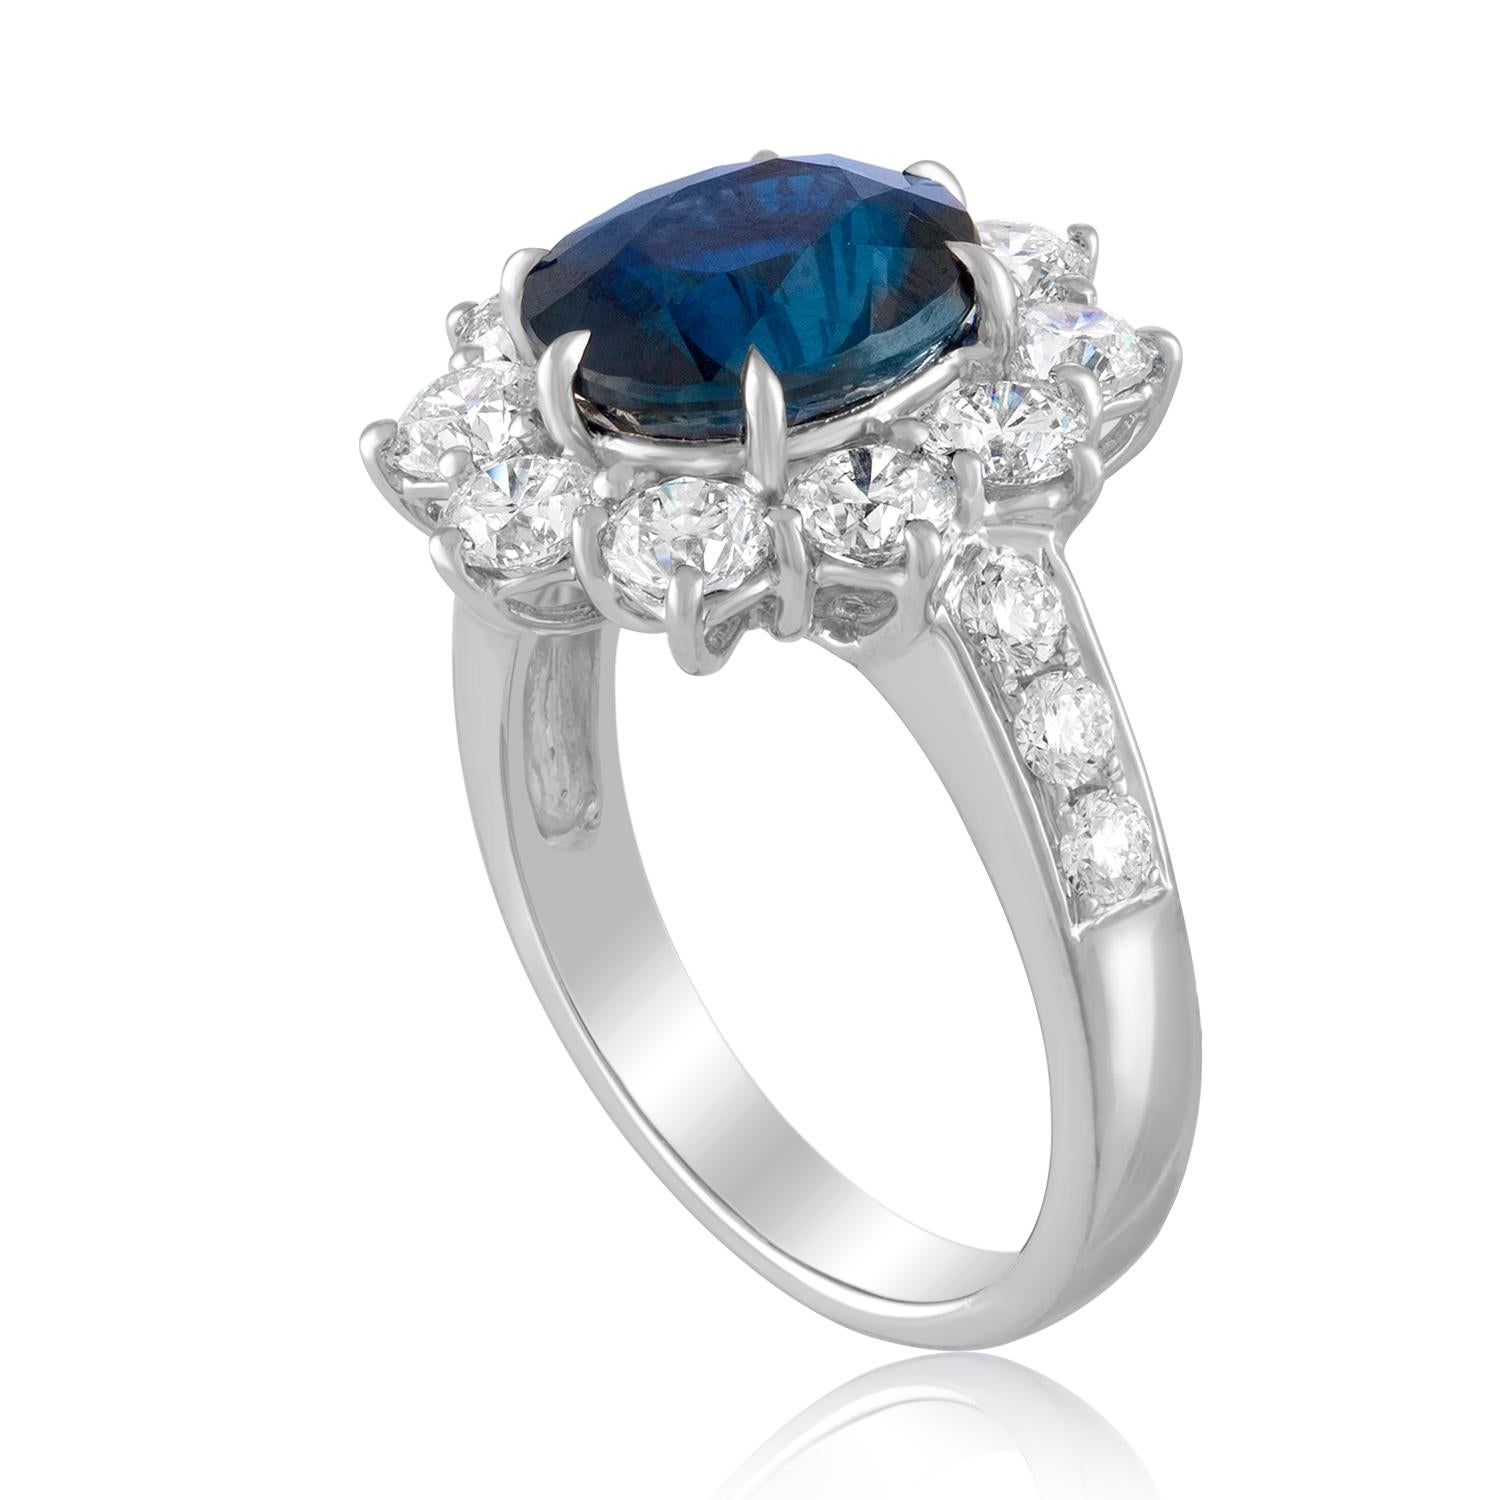 Beautiful Classic Oval Halo Ring.
The ring is 18K White Gold.
The ring has 2.13 Carats in Diamonds F VS.
The center stone is an oval shaped 4.07 Carat Blue Sapphire.
The Sapphire is certified by AGL, NO HEAT.
The top of the ring measures 17.67 mm x